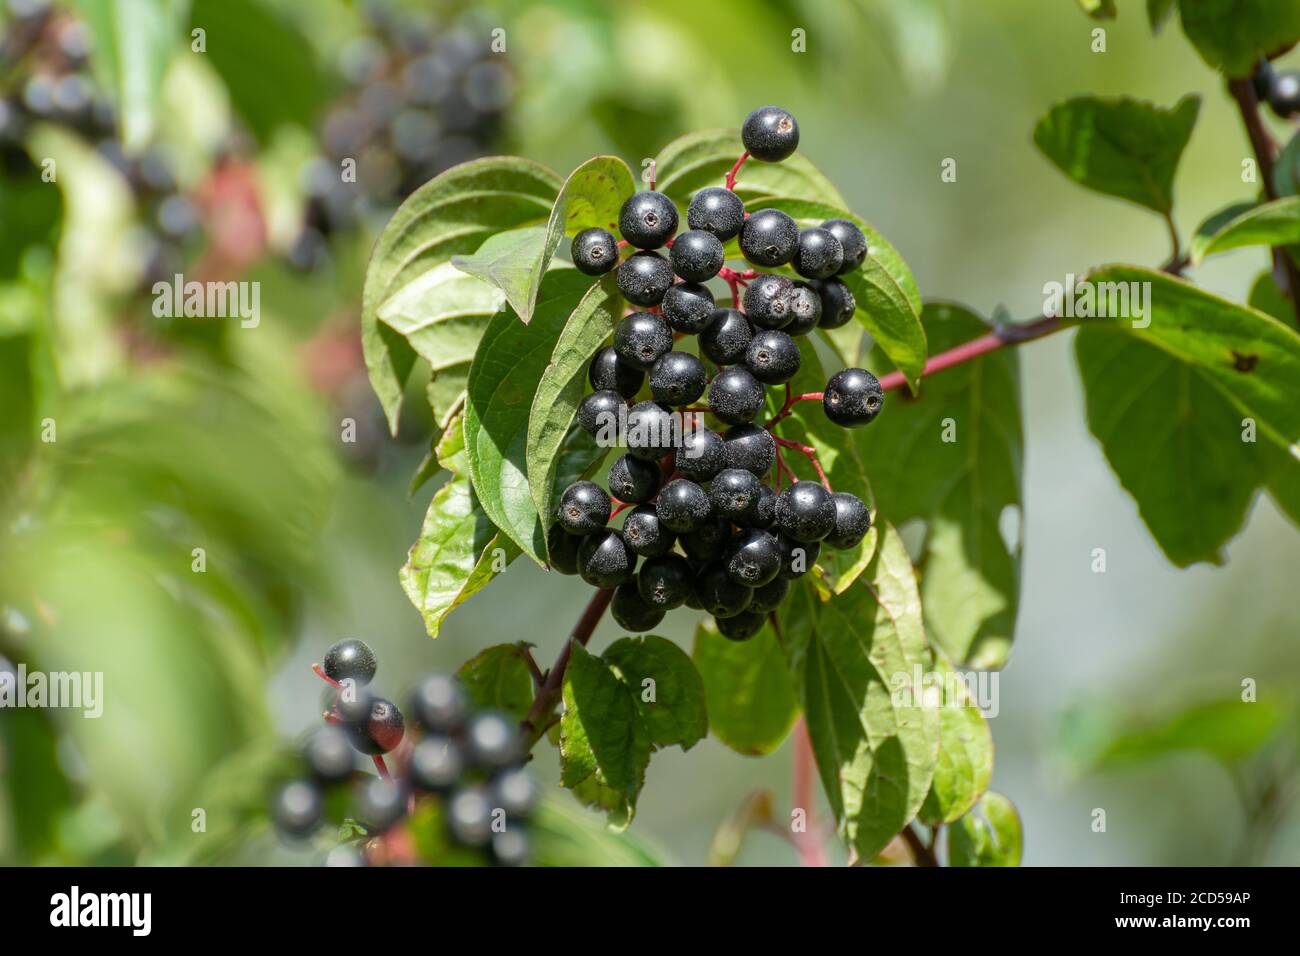 Dogwood shrub (Cornus sanguinea) with clusters of black berries (dogberries) and red twigs growing wild in a hedgerow, late summer, UK Stock Photo